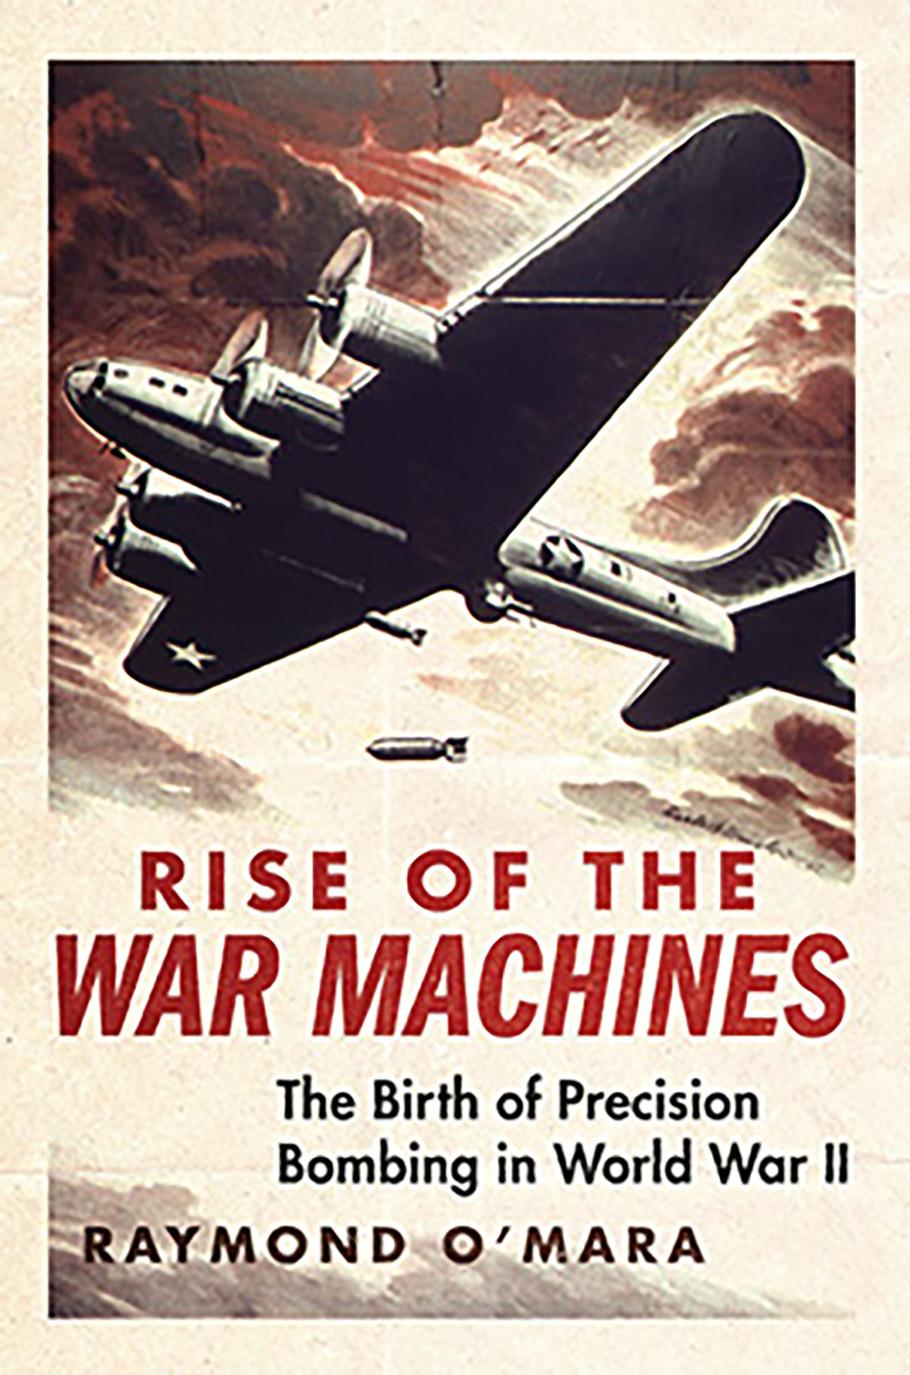 A book cover showing vintage illustration of an airplane. The text on the cover reads "Rise of the War Machines. The Birth of Precision Bombing in World War II. Raymond O'Mara."